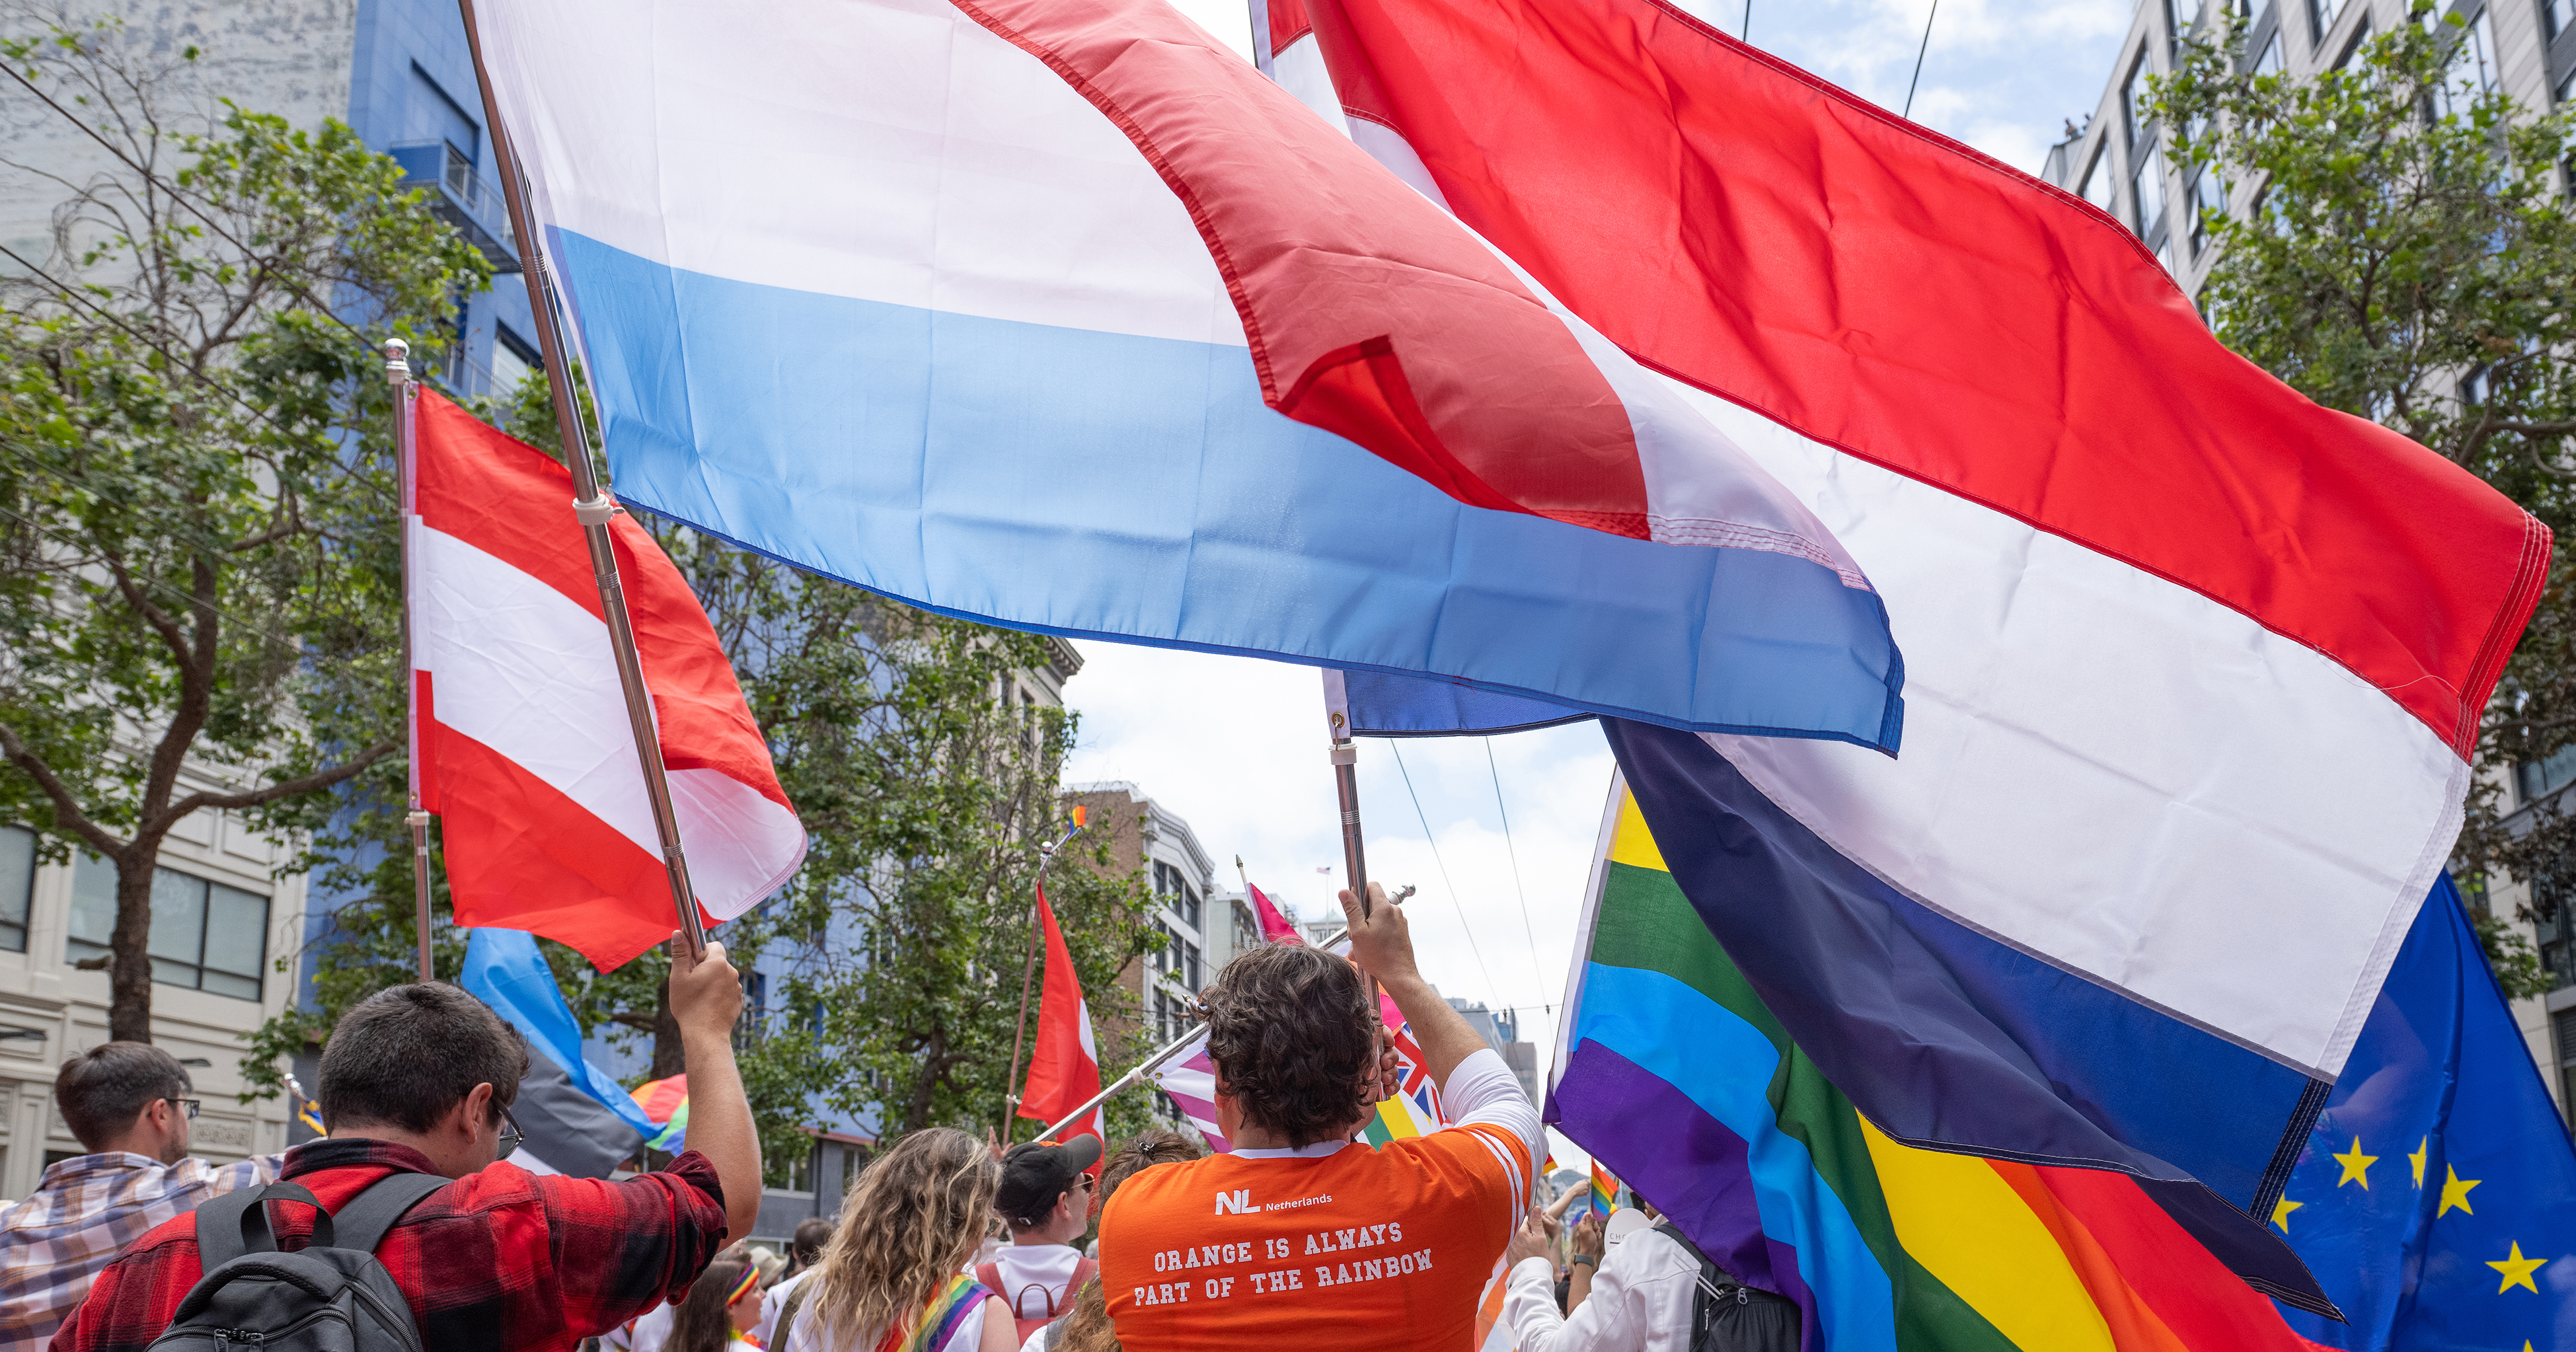 The Netherlands and other European Consulates participated in San Francisco Pride Parade showing support for LGBTQ+ rights in the US and worldwide.